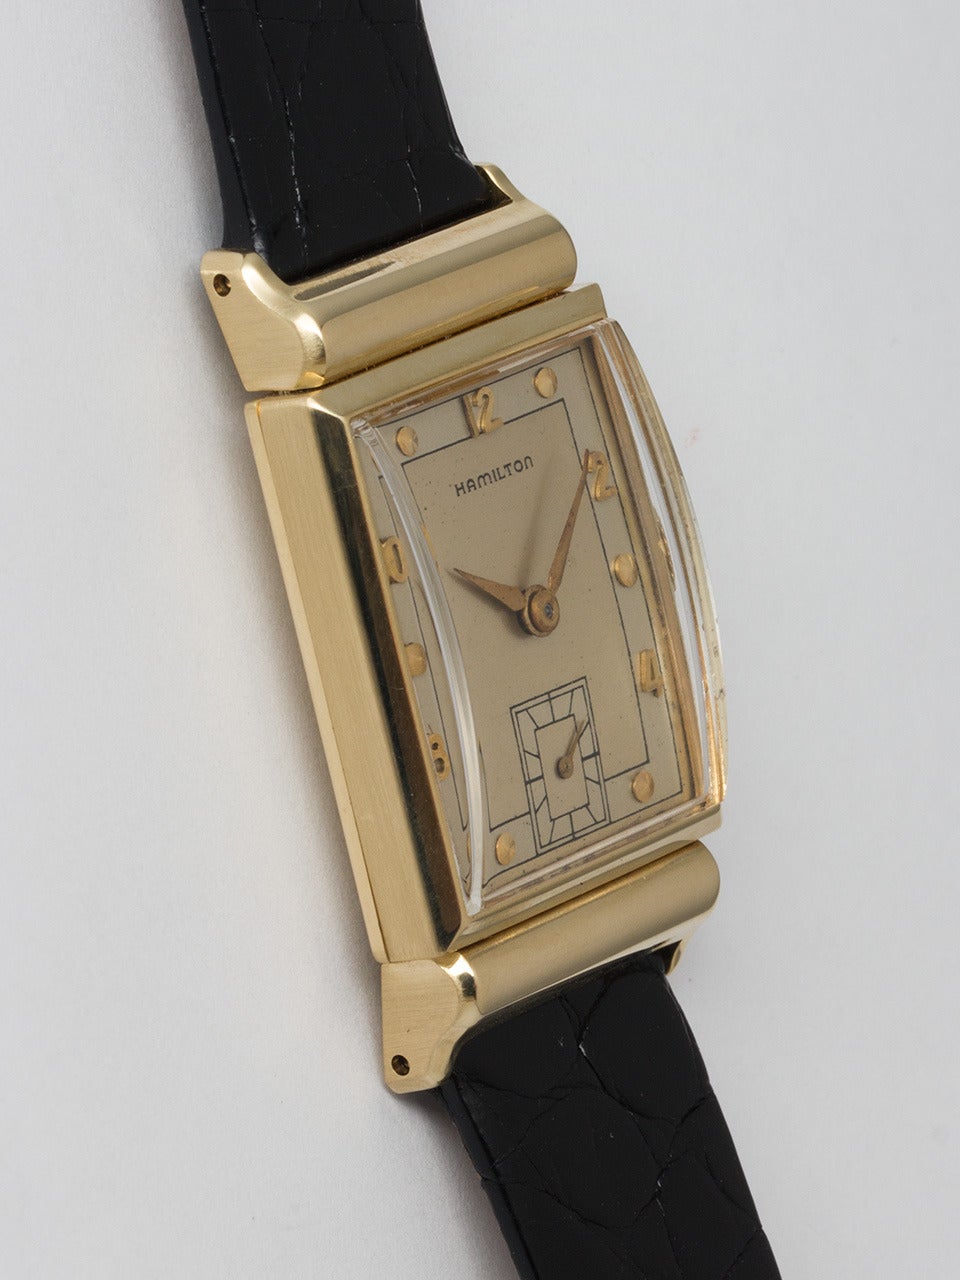 Hamilton 14K Yellow Gold Gordon Wristwatch, circa 1949. Featuring a 23 x 39.5mm rectangular case with hooded lugs. Original 2 tone silvered satin dial with raised yellow gold dots and numerals. Powered by Hamilton 982 caliber manual wind movement